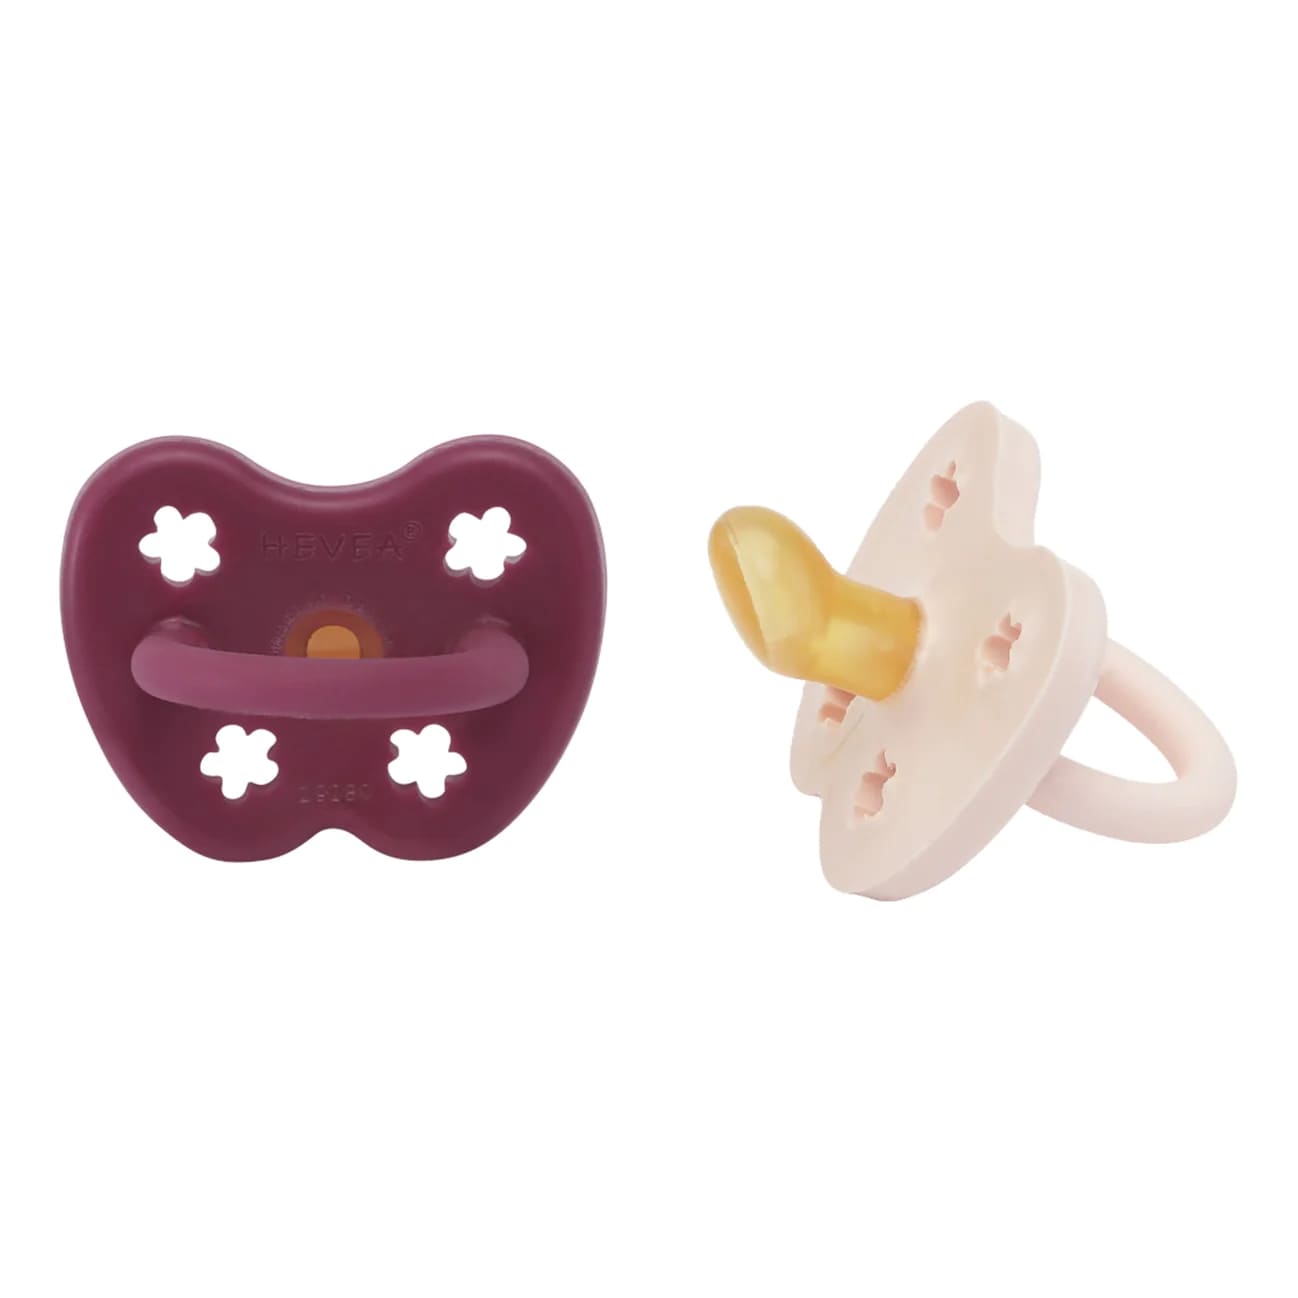 Hevea Natural Rubber Pacifier Orthodontic 3-36 Months Two-pack Baby Blush & Rosewood HE-CP-O-2PK-BB-RW-3-36